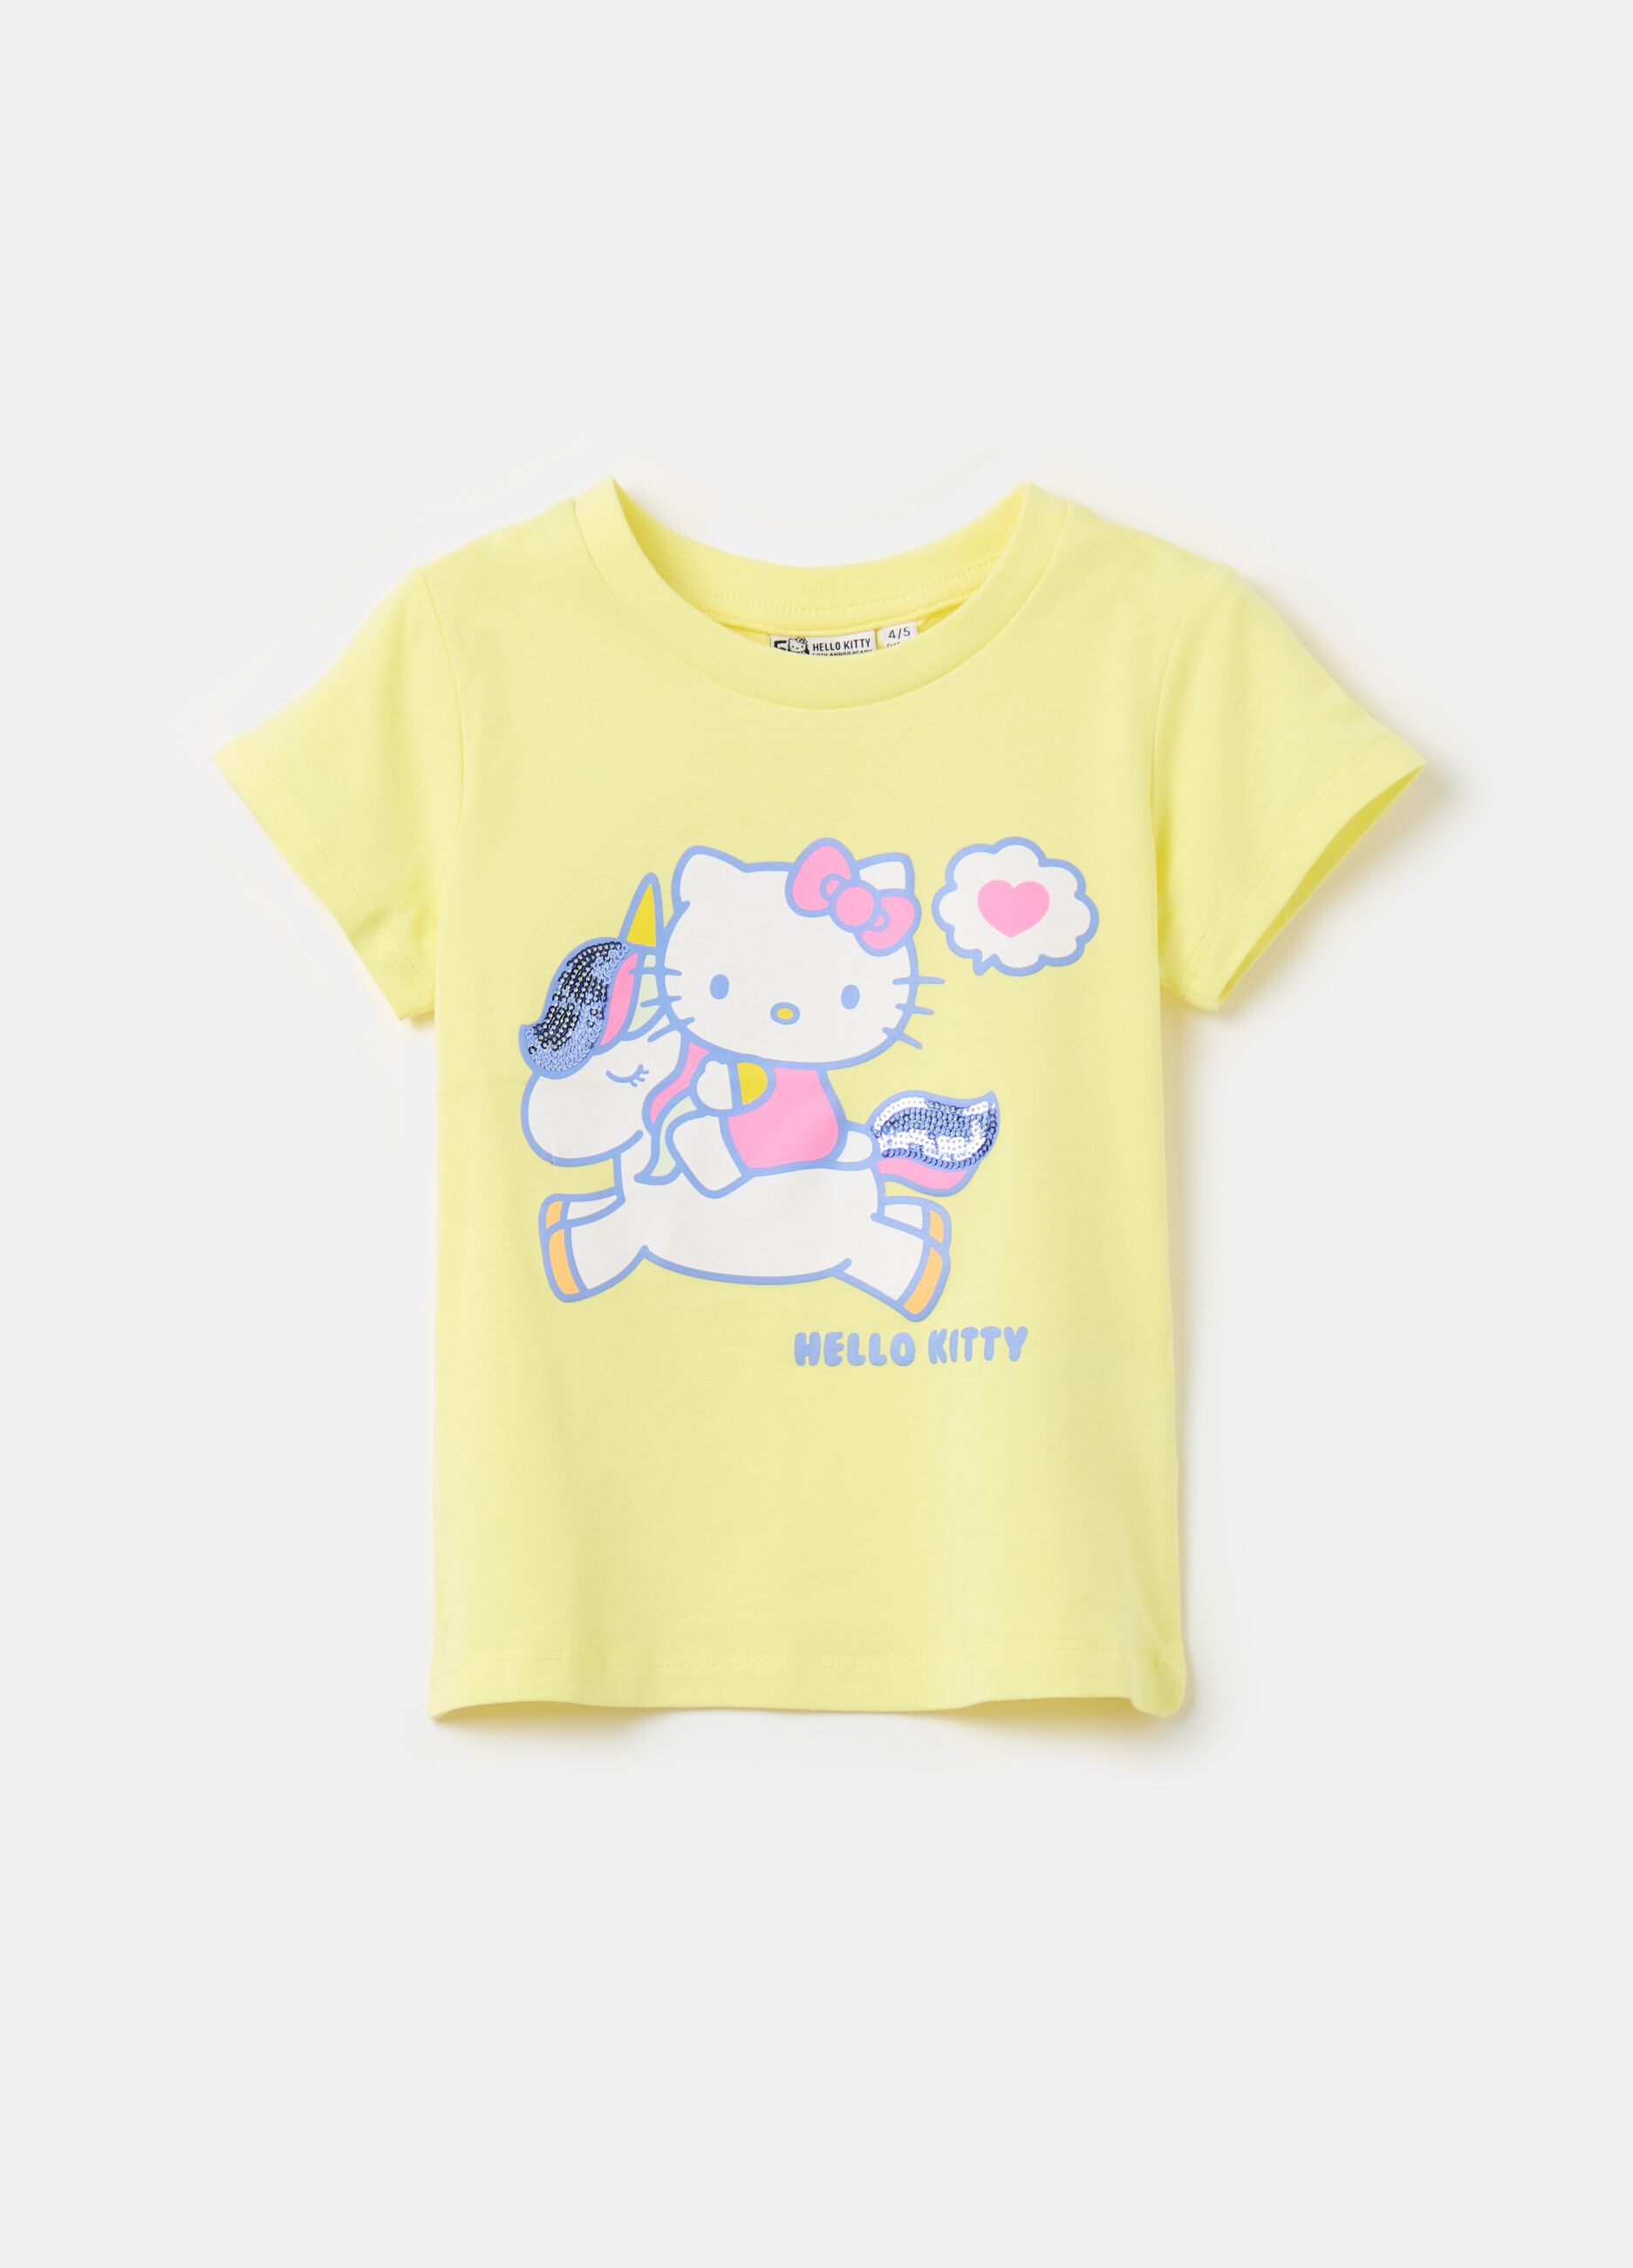 T-shirt with Hello Kitty print with unicorn